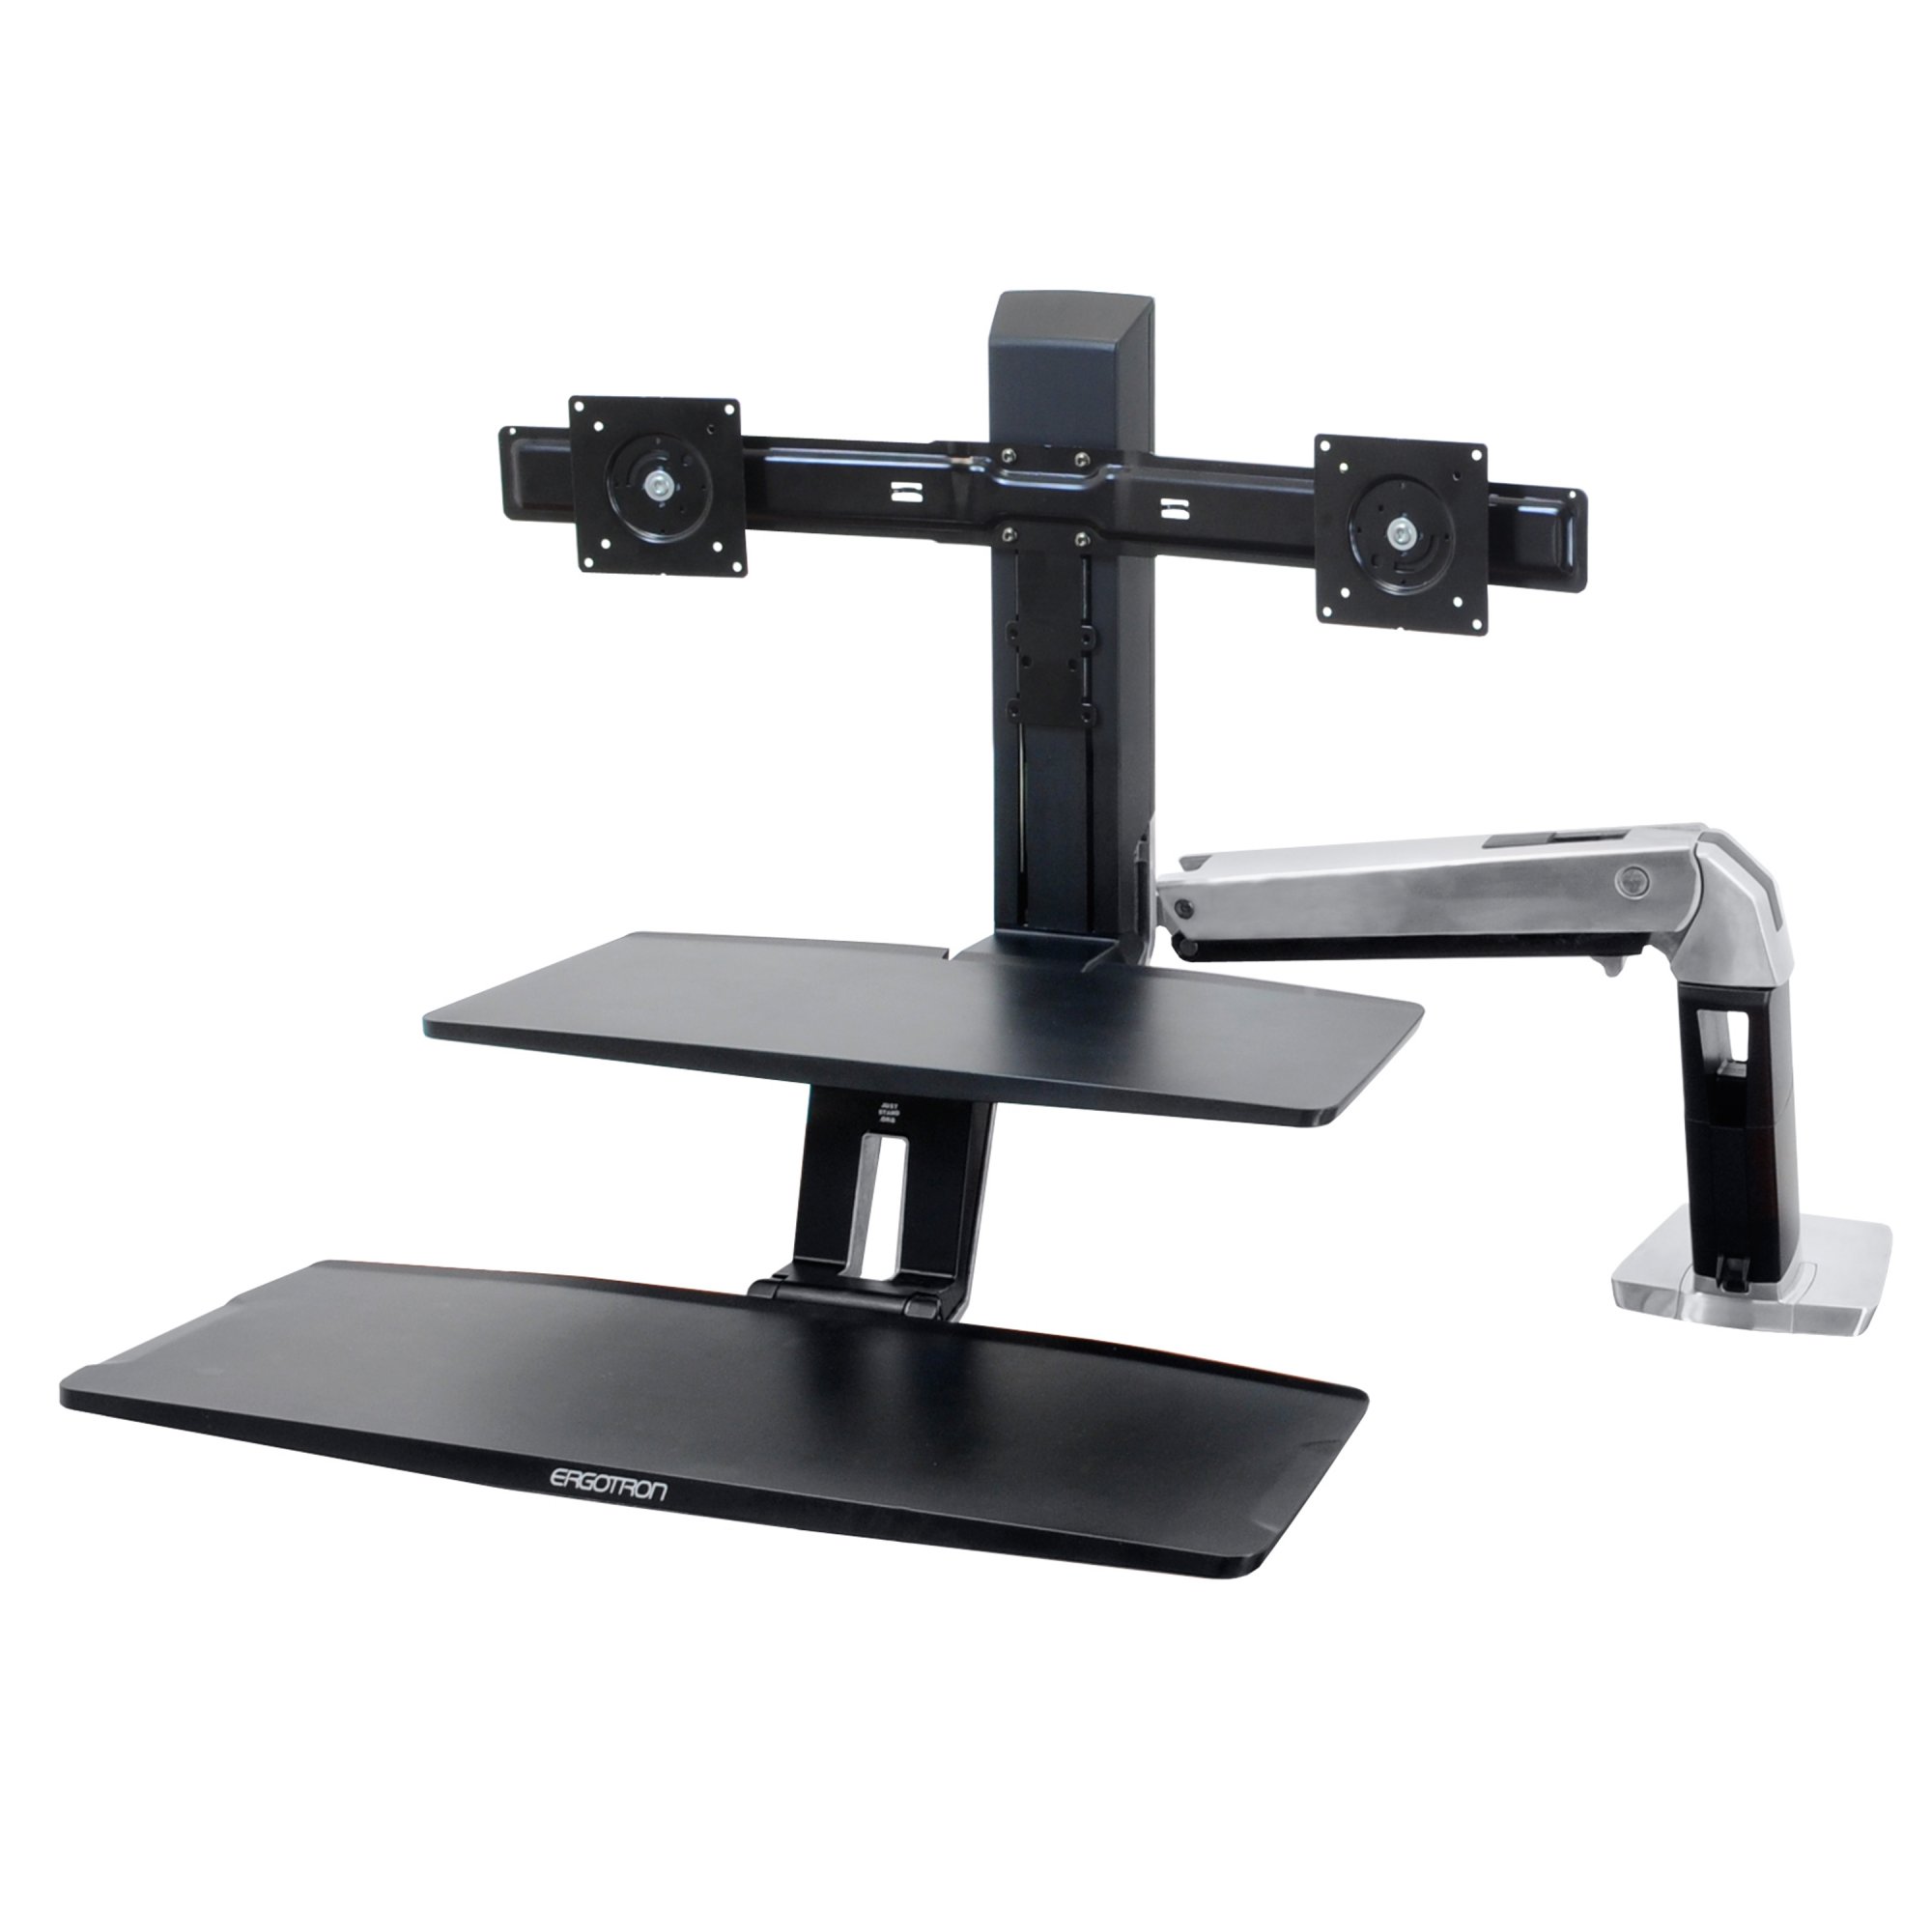 Ergotron 24-392-026 WorkFit-A with Suspended Keyboard, Dual